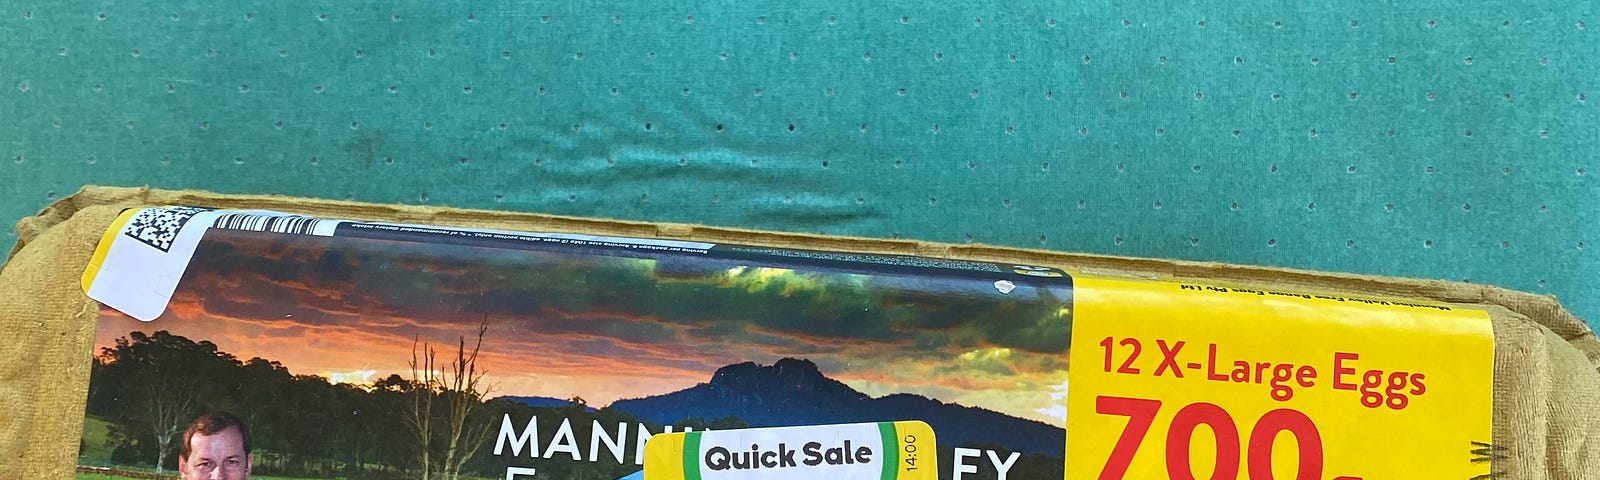 Egg carton with a “Quick sale” sticker on the front.